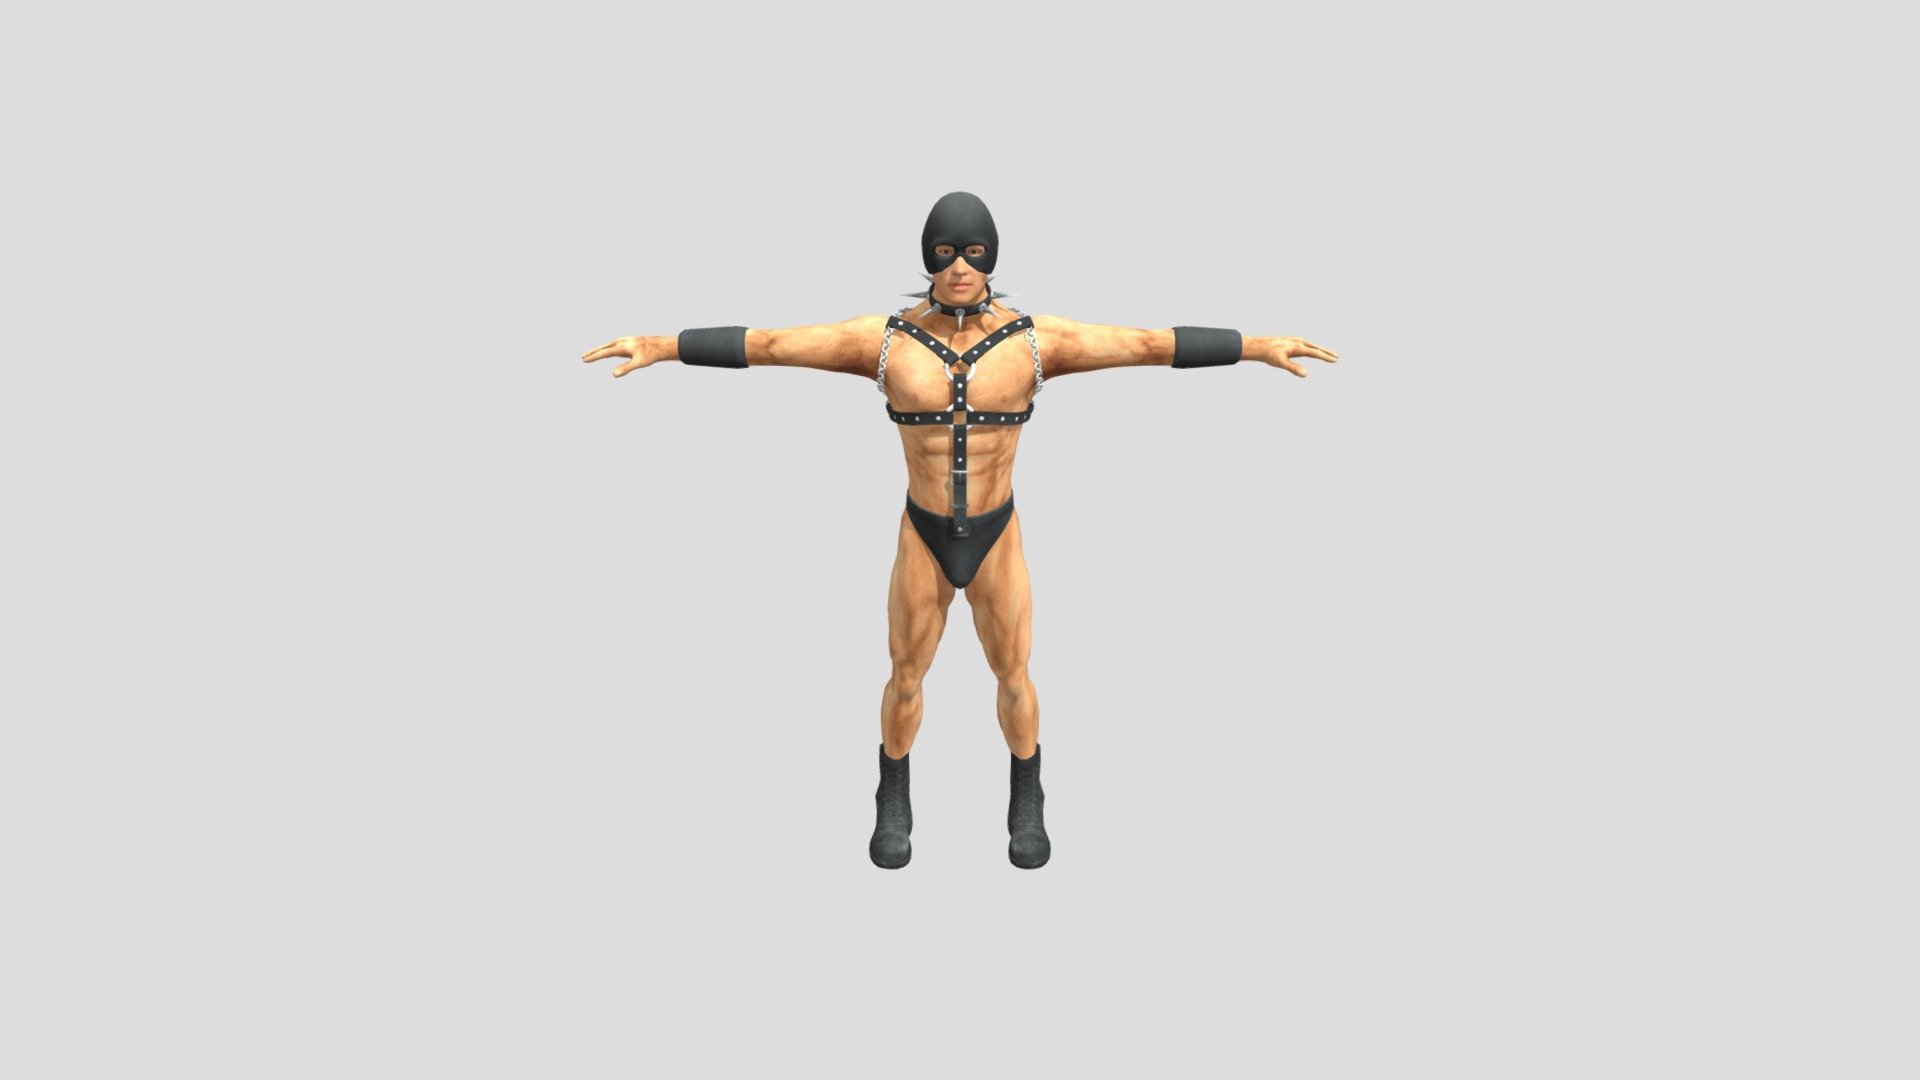 [Deep Dark Fantasy] Van Darkholme. 

The model was created for GoldSource engine. Low Poly, T-Pose. 



Key Authors: 

Skrip 

Special Thanks: 

part of model John Rambo by COD: BOCW 

[torso, boots] 

part of model Billy Herrington by Timhok 

[legs] 



I tried to download the full version of the model, but due to errors when downloading the blend file, I was unable to do so. Therefore, the full model is available here: https://gamebanana.com/wips/79592 - Van Darkholme - Download Free 3D model by Skrip (@chakkiskrip) 3d model